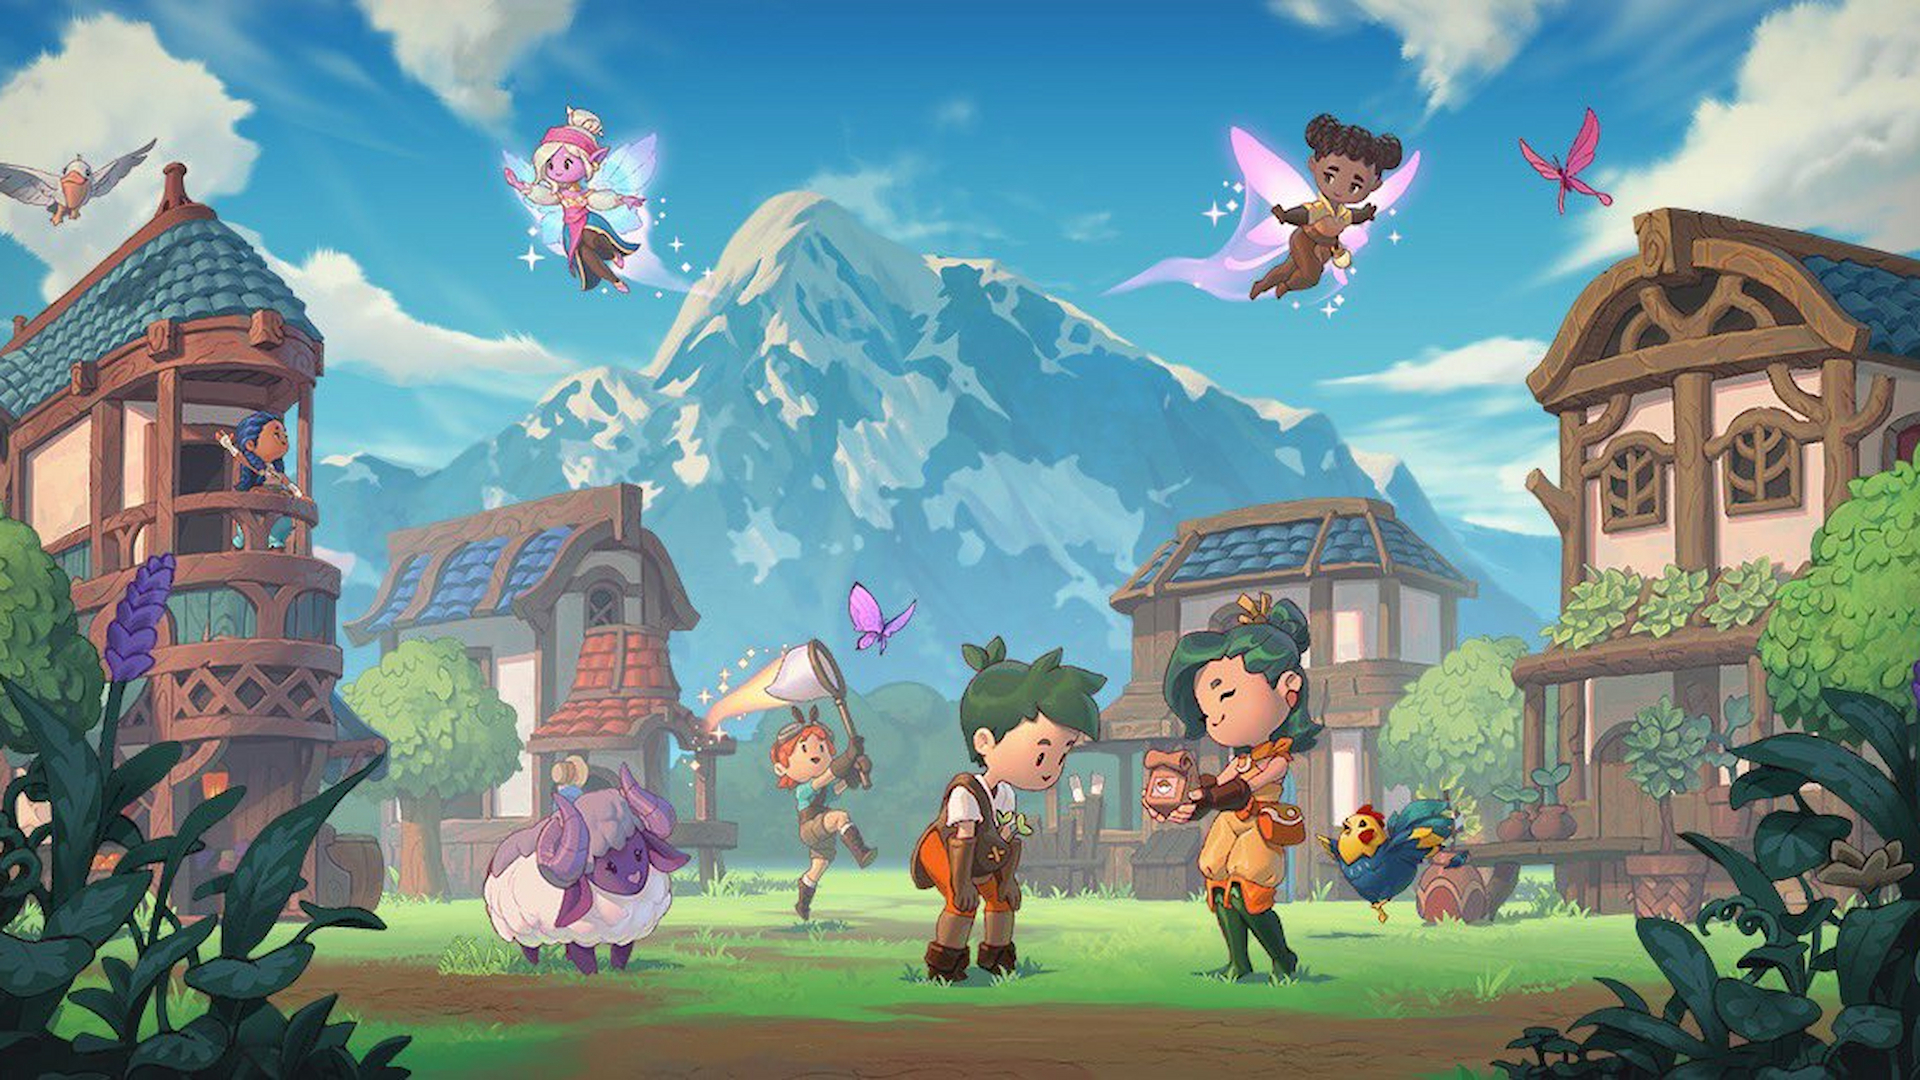 Fae Farm is like Stardew Valley with fairies and I can't wait